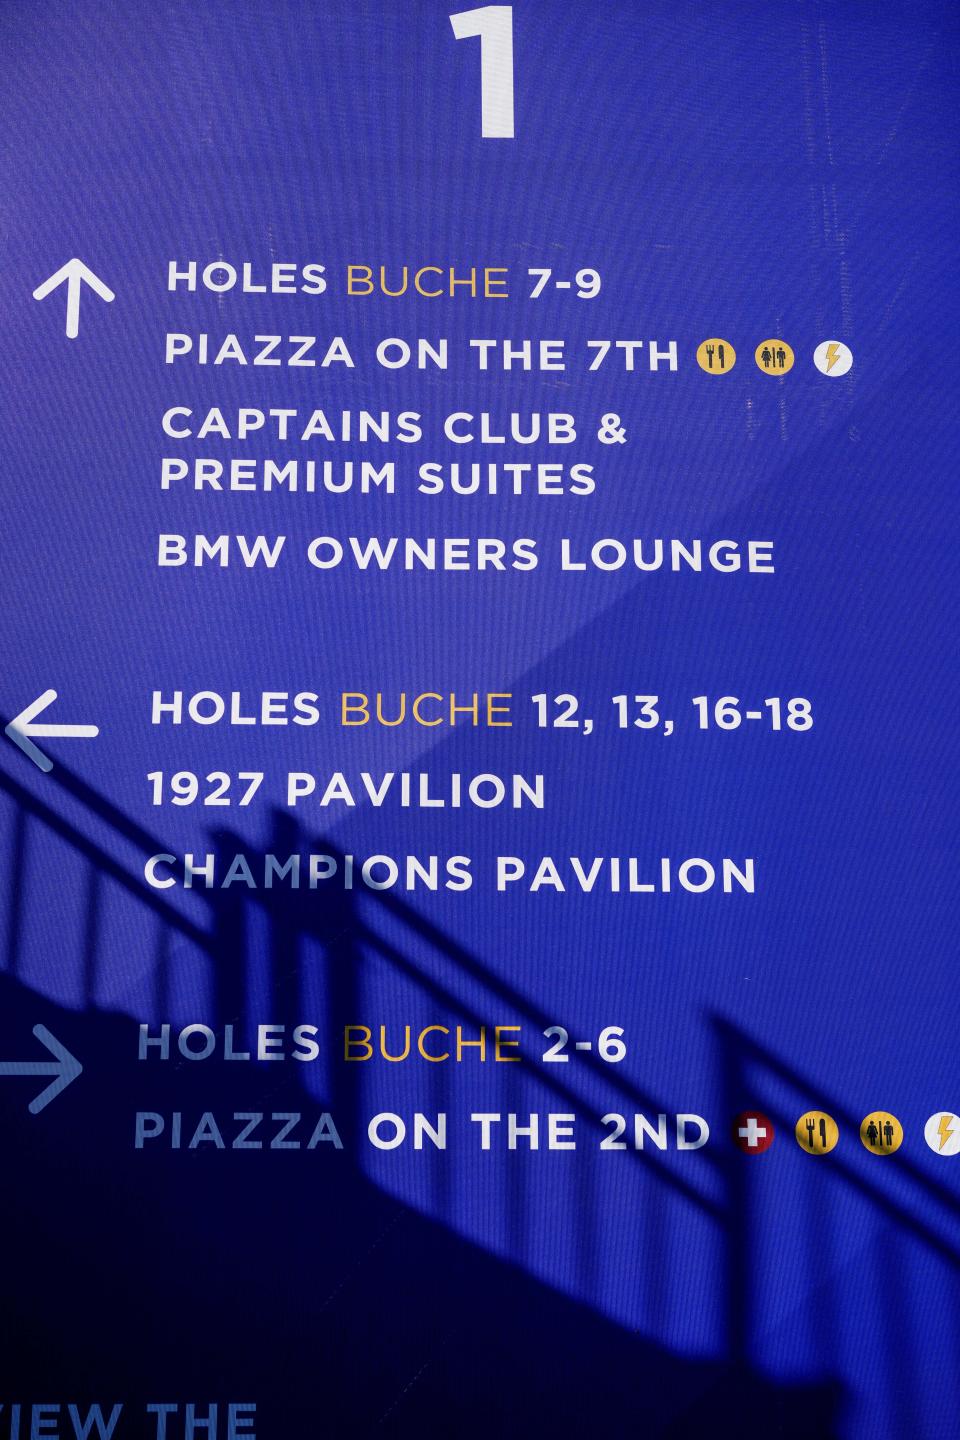 A sign with directions in English and Italian on the course of the Marco Simone Golf Club in Guidonia Montecelio, Monday, Sept. 25, 2023. The Marco Simone Club on the outskirts of Rome will host the 44th edition of The Ryder Cup, the biennial competition between Europe and the United States headed to Italy for the first time. (AP Photo/Andrew Medichini)